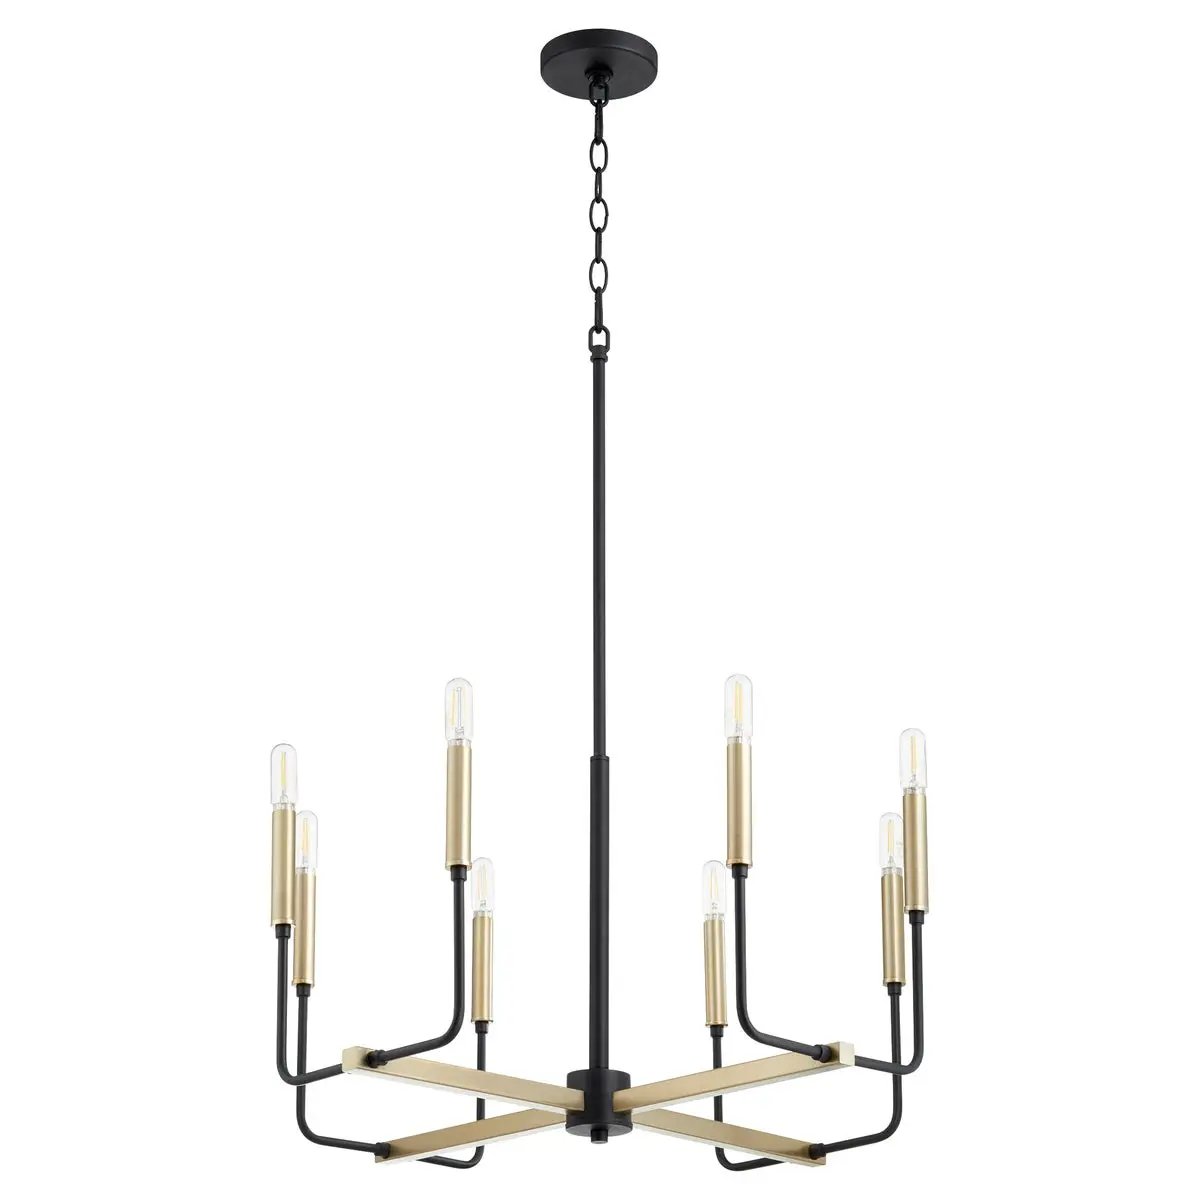 Contemporary chandelier with adjustable chain and stems, featuring eight candelabra light sources. Sleek minimalist design with aged brass-noir finish. Suitable for indoor and outdoor spaces.